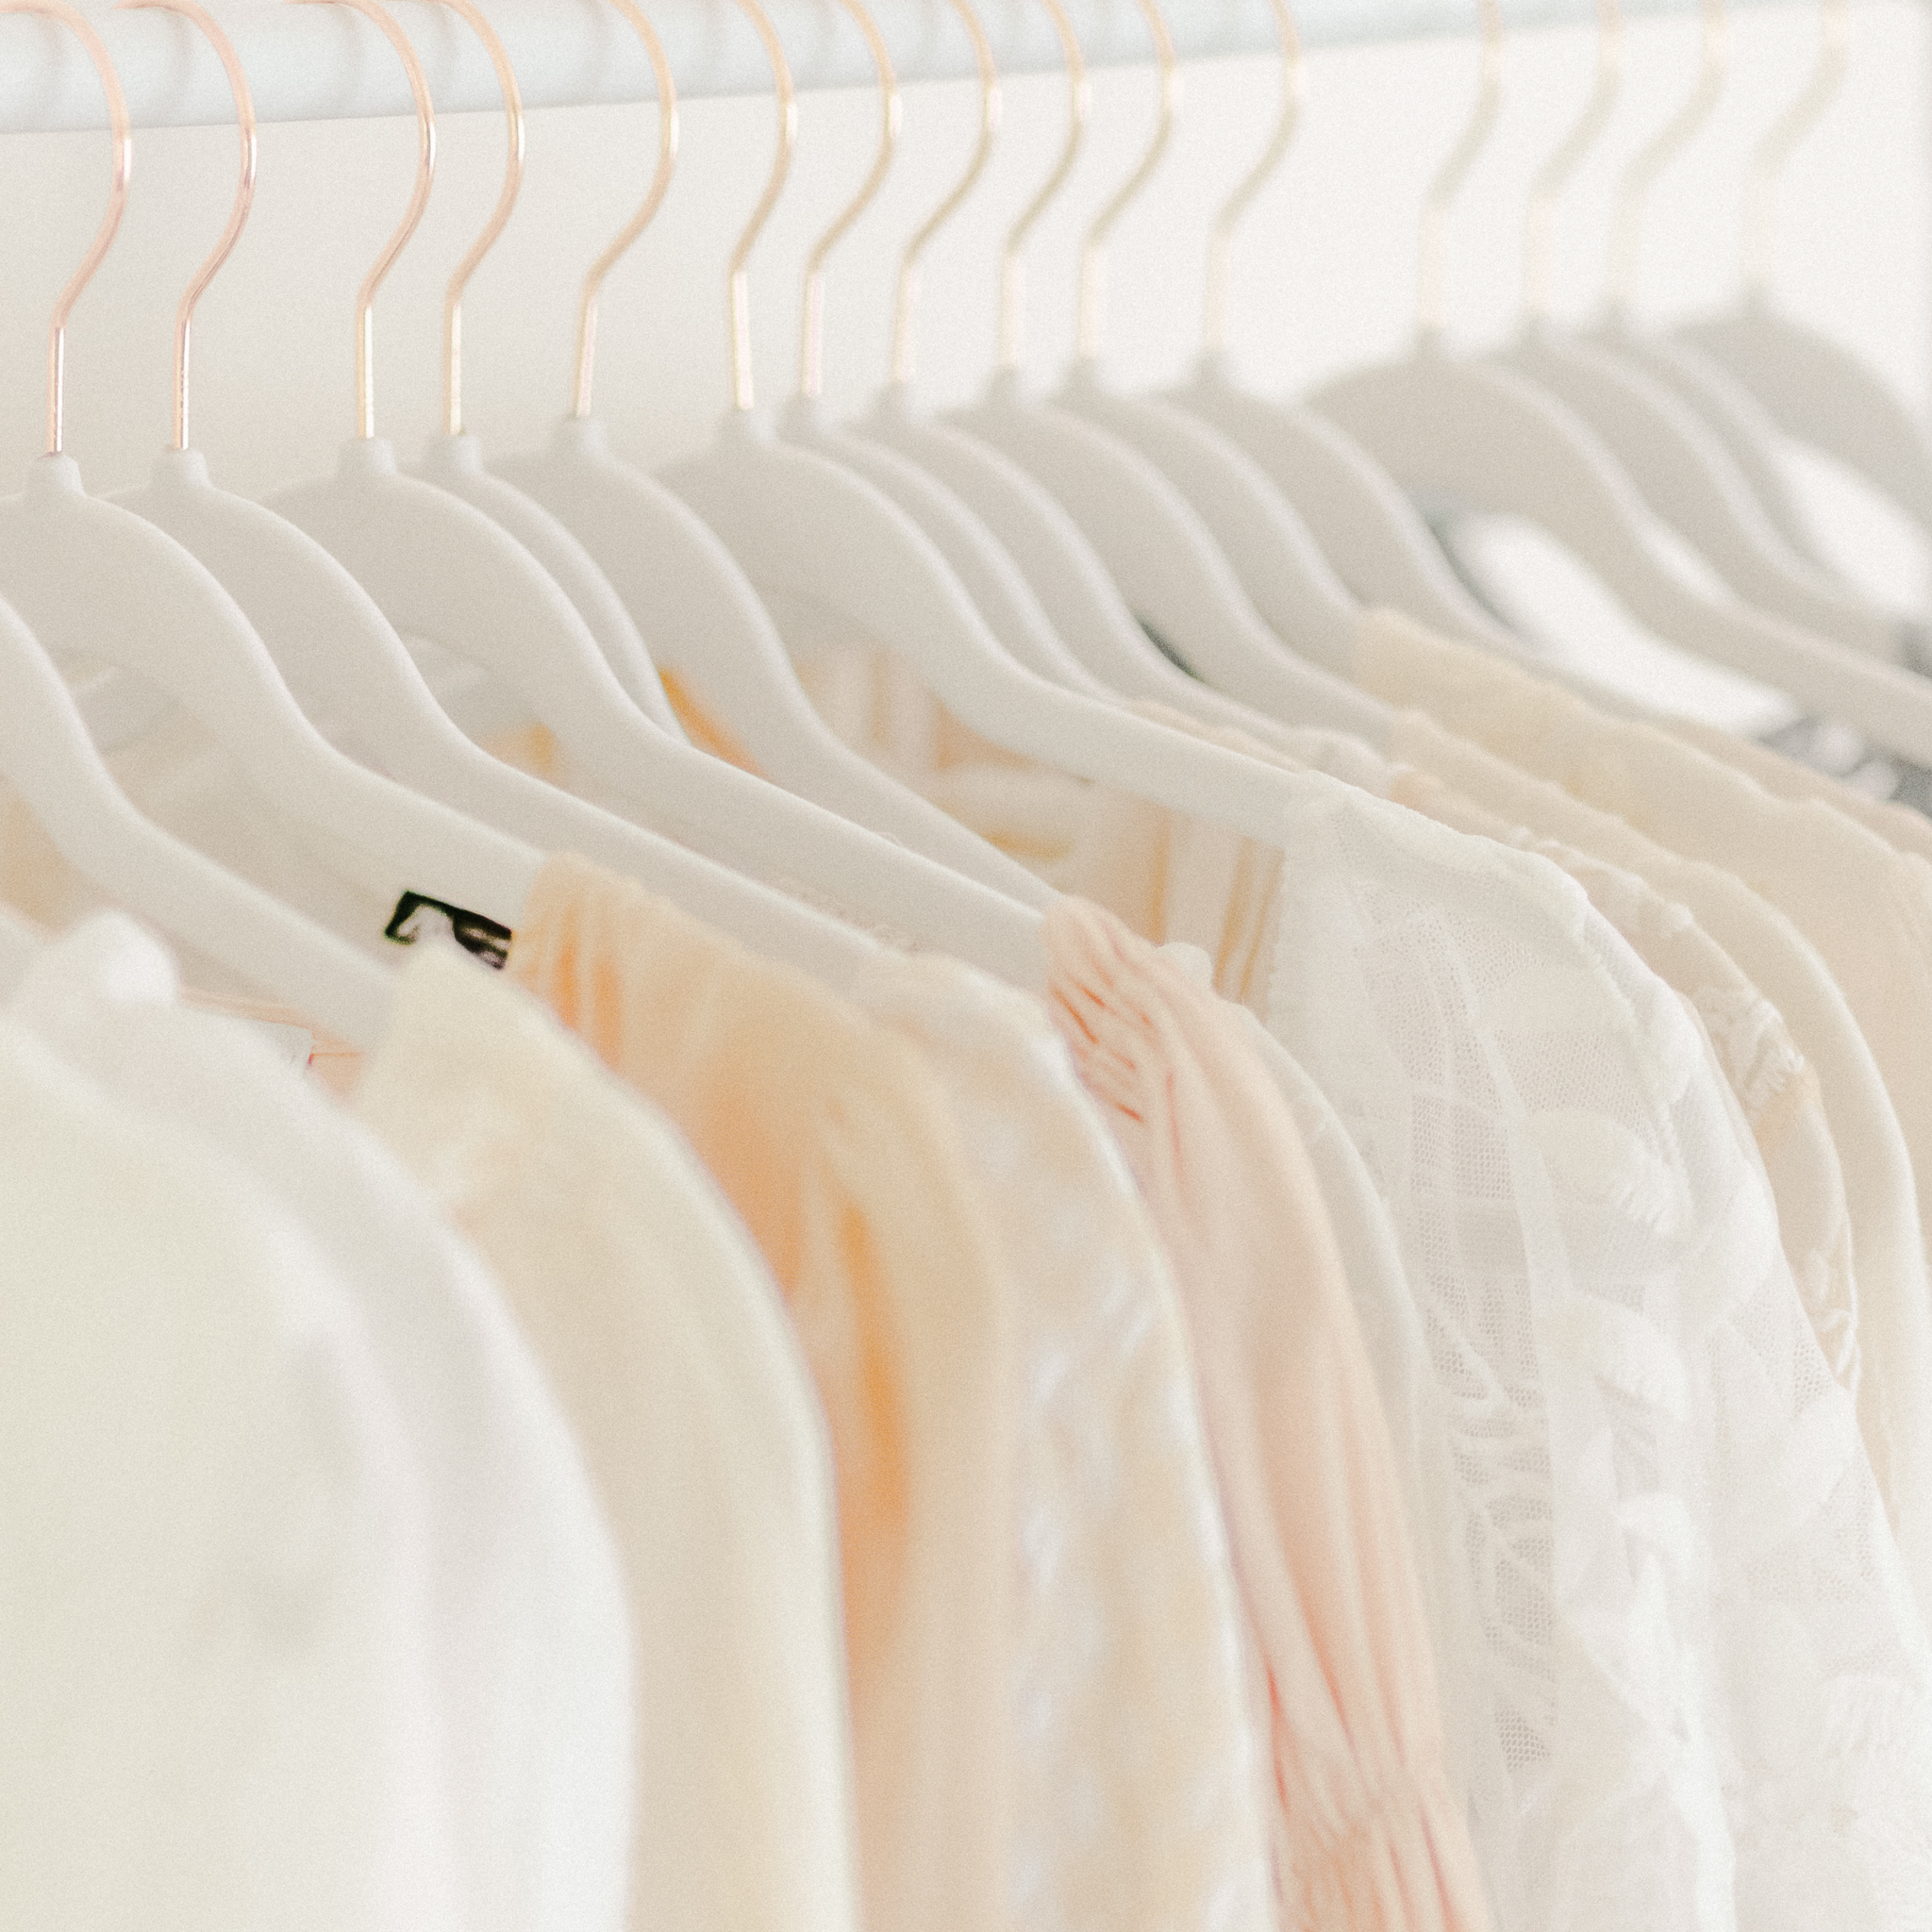 dresses hanging in a client closet: essential questions to ask before hiring a photographer